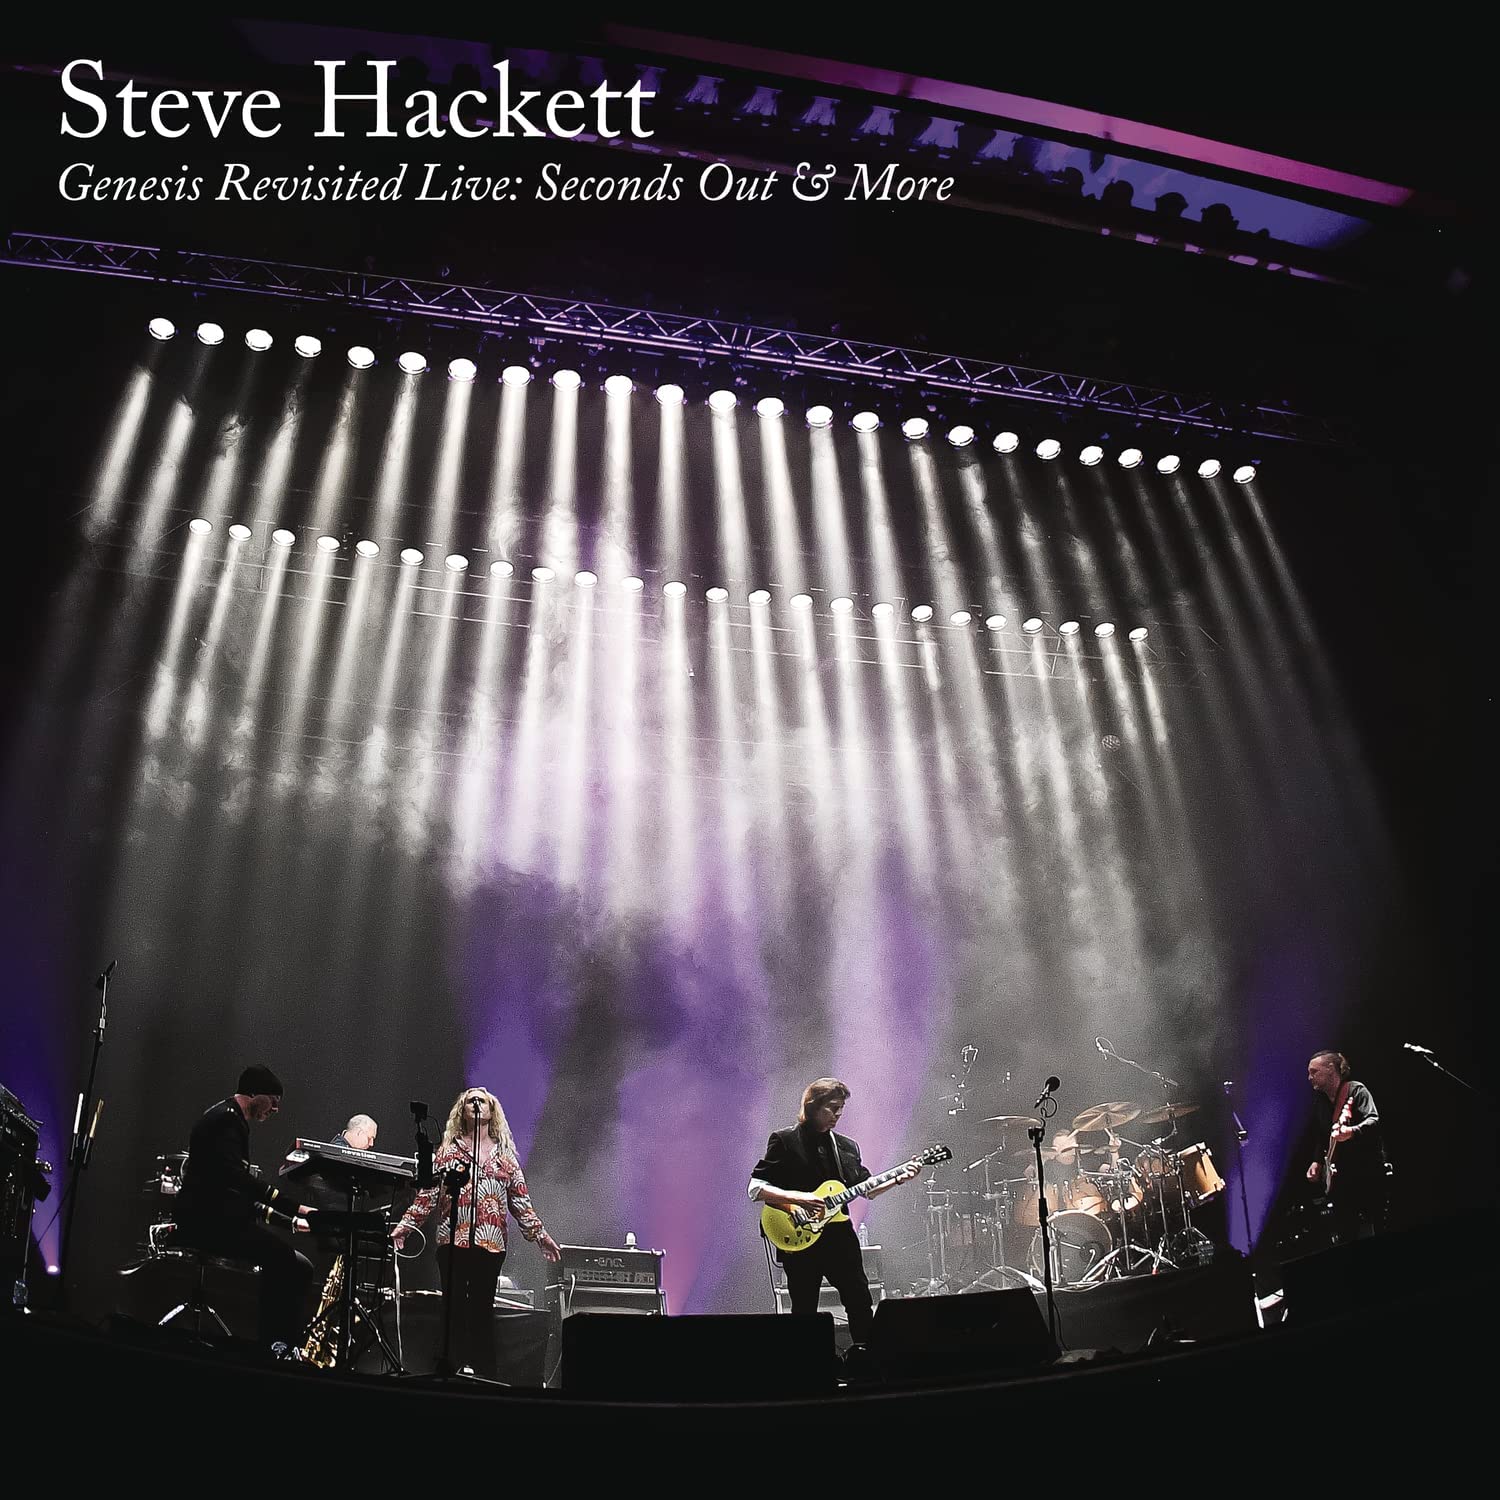 Genesis Revisited Live: Seconds Out & More (Limited Edition CD2+DVD2) | Steve Hackett image0